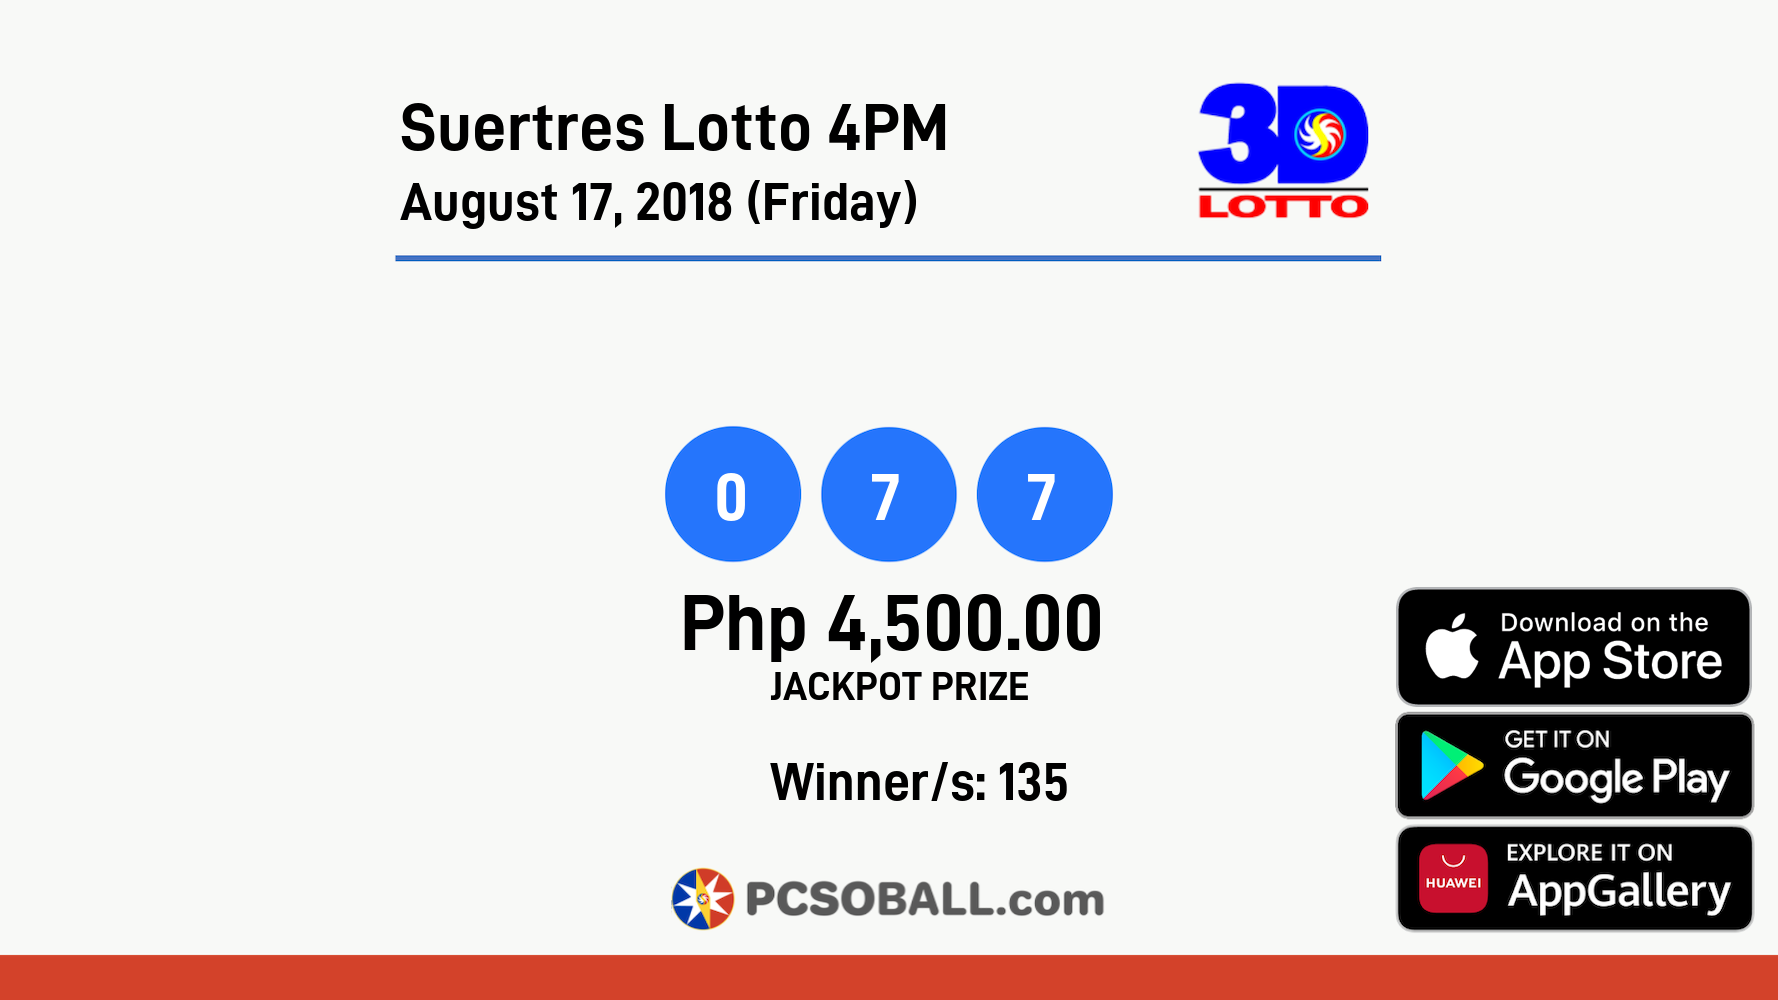 Suertres Lotto 4PM August 17, 2018 (Friday) Result